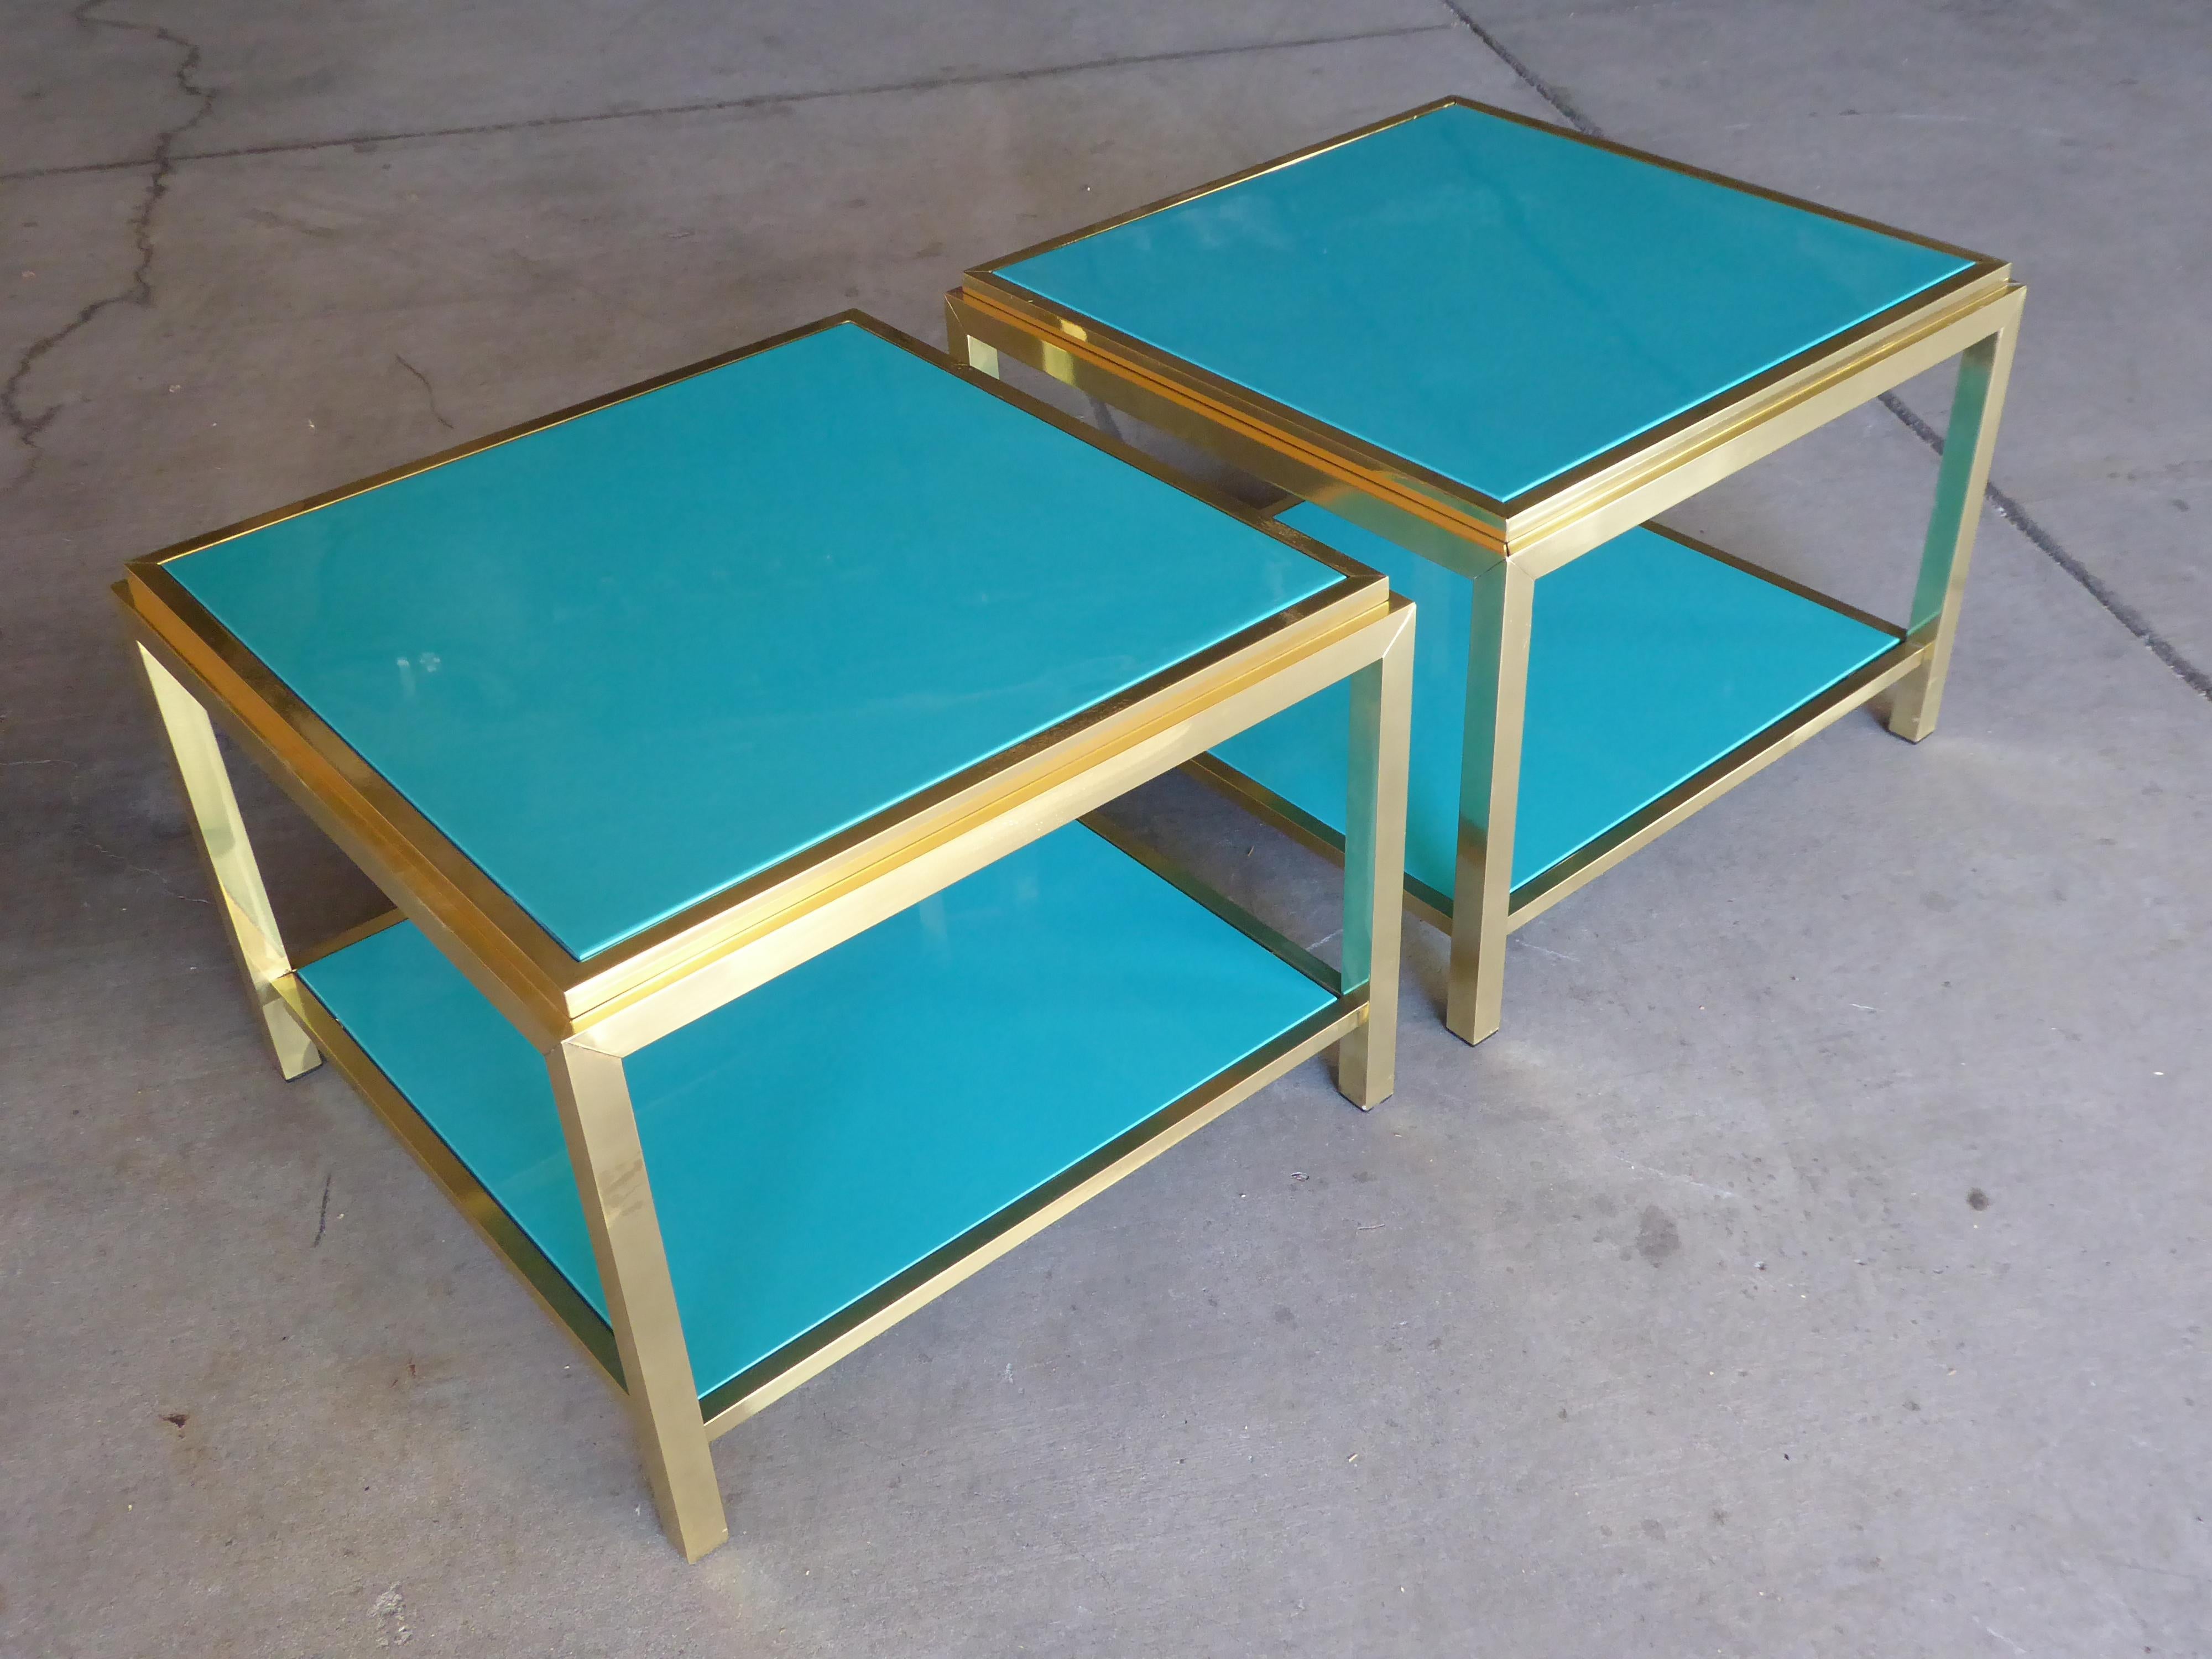 A pair of solid brass two-tier square side table with peacock blue lacquered tops and shelves. The tables are attributed to Mastercraft and the lacquered wood surfaces are recent additions.